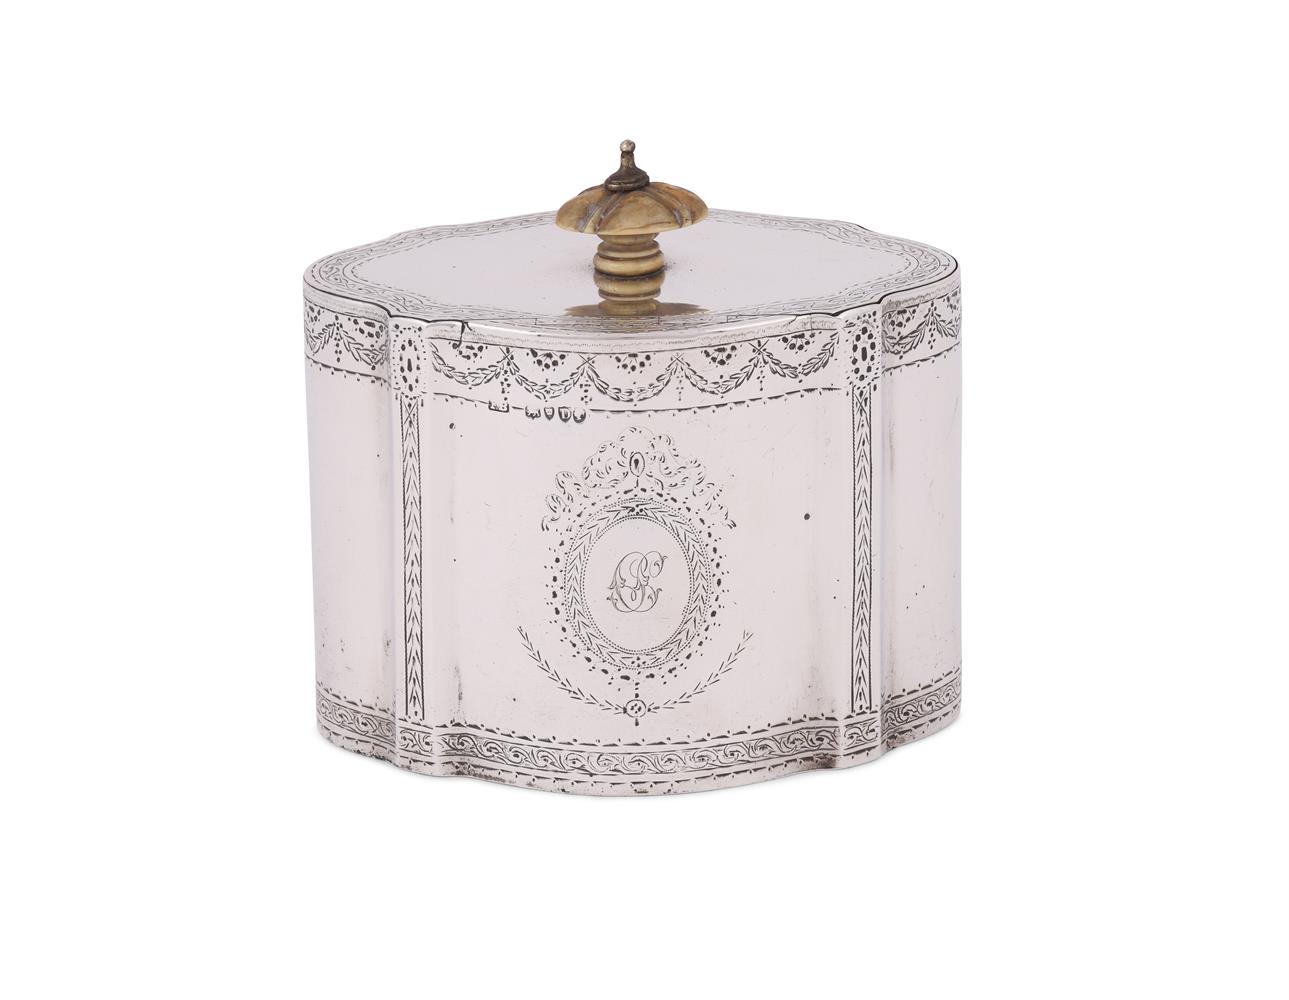 Y A VICTORIAN SILVER SHAPED OVAL TEA CADDY - Image 2 of 3